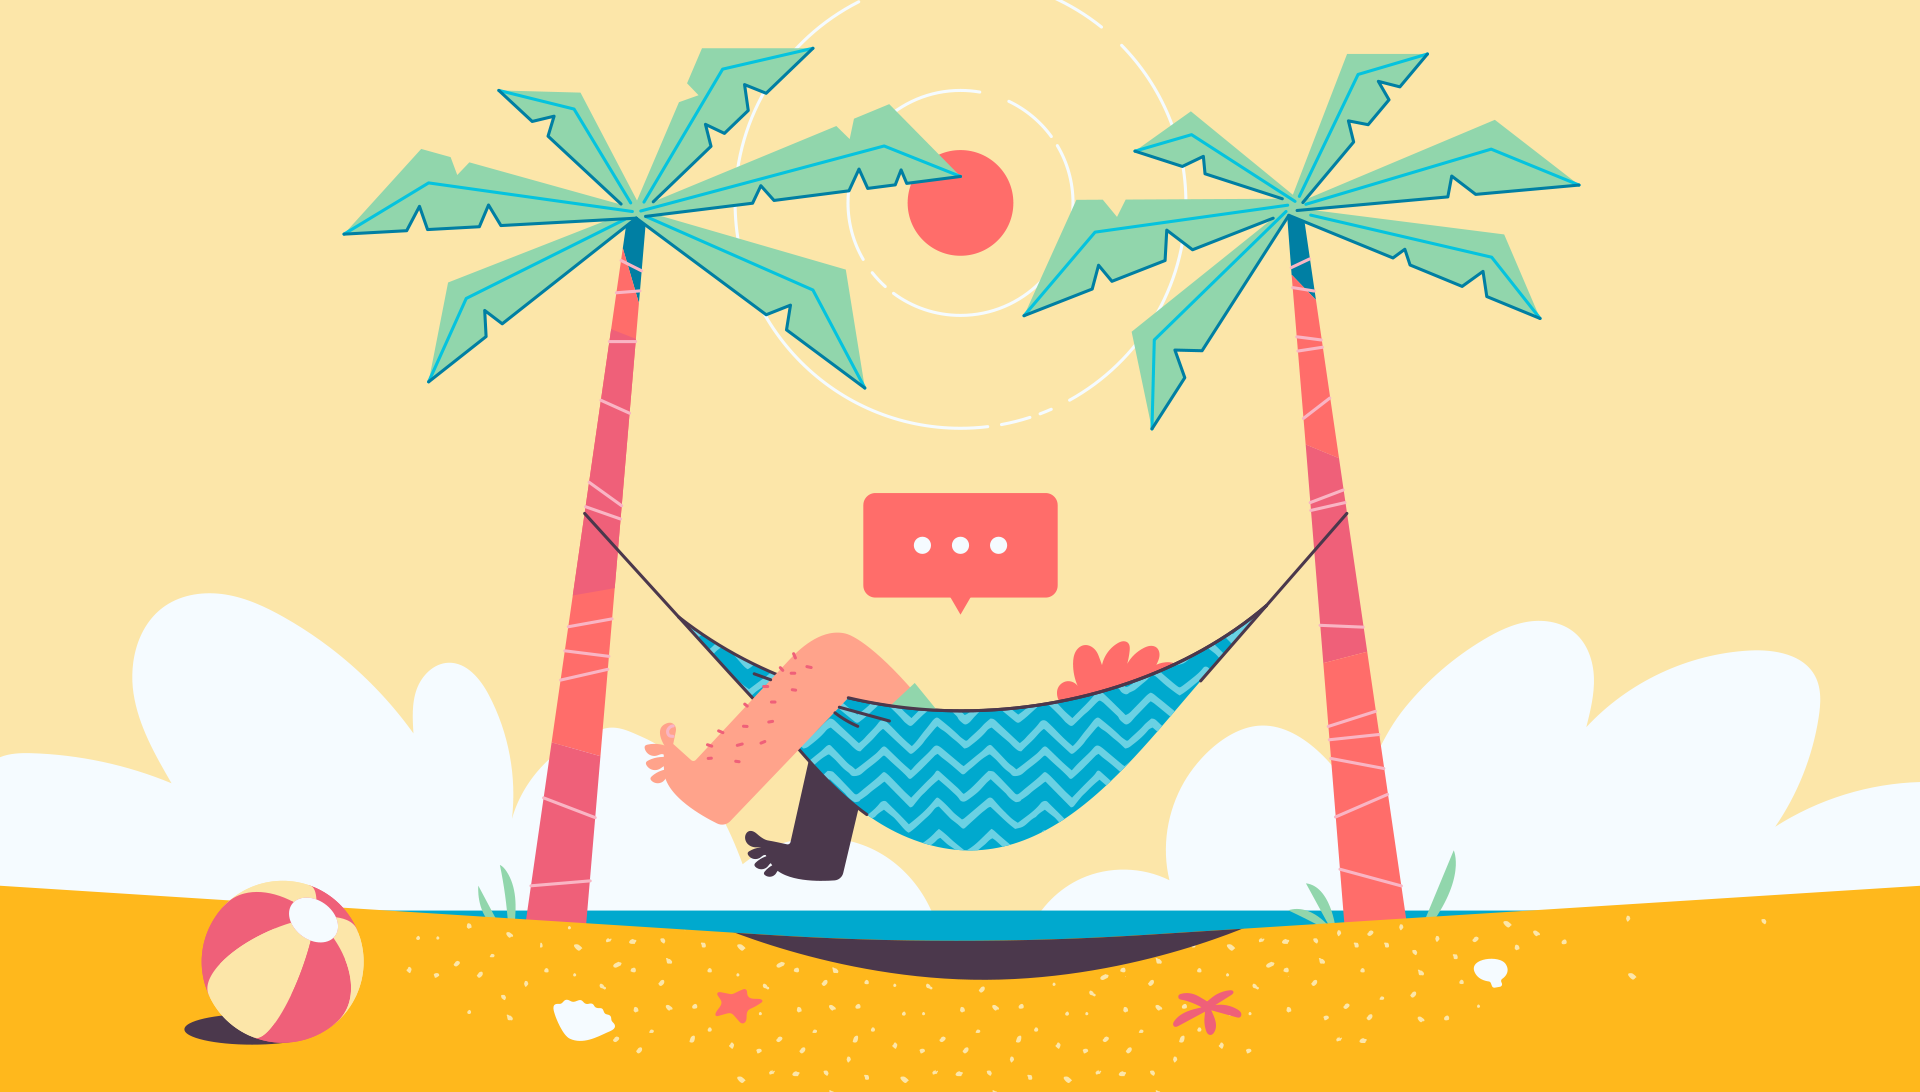 An illustration of someone working from a hammock on a sunny beach